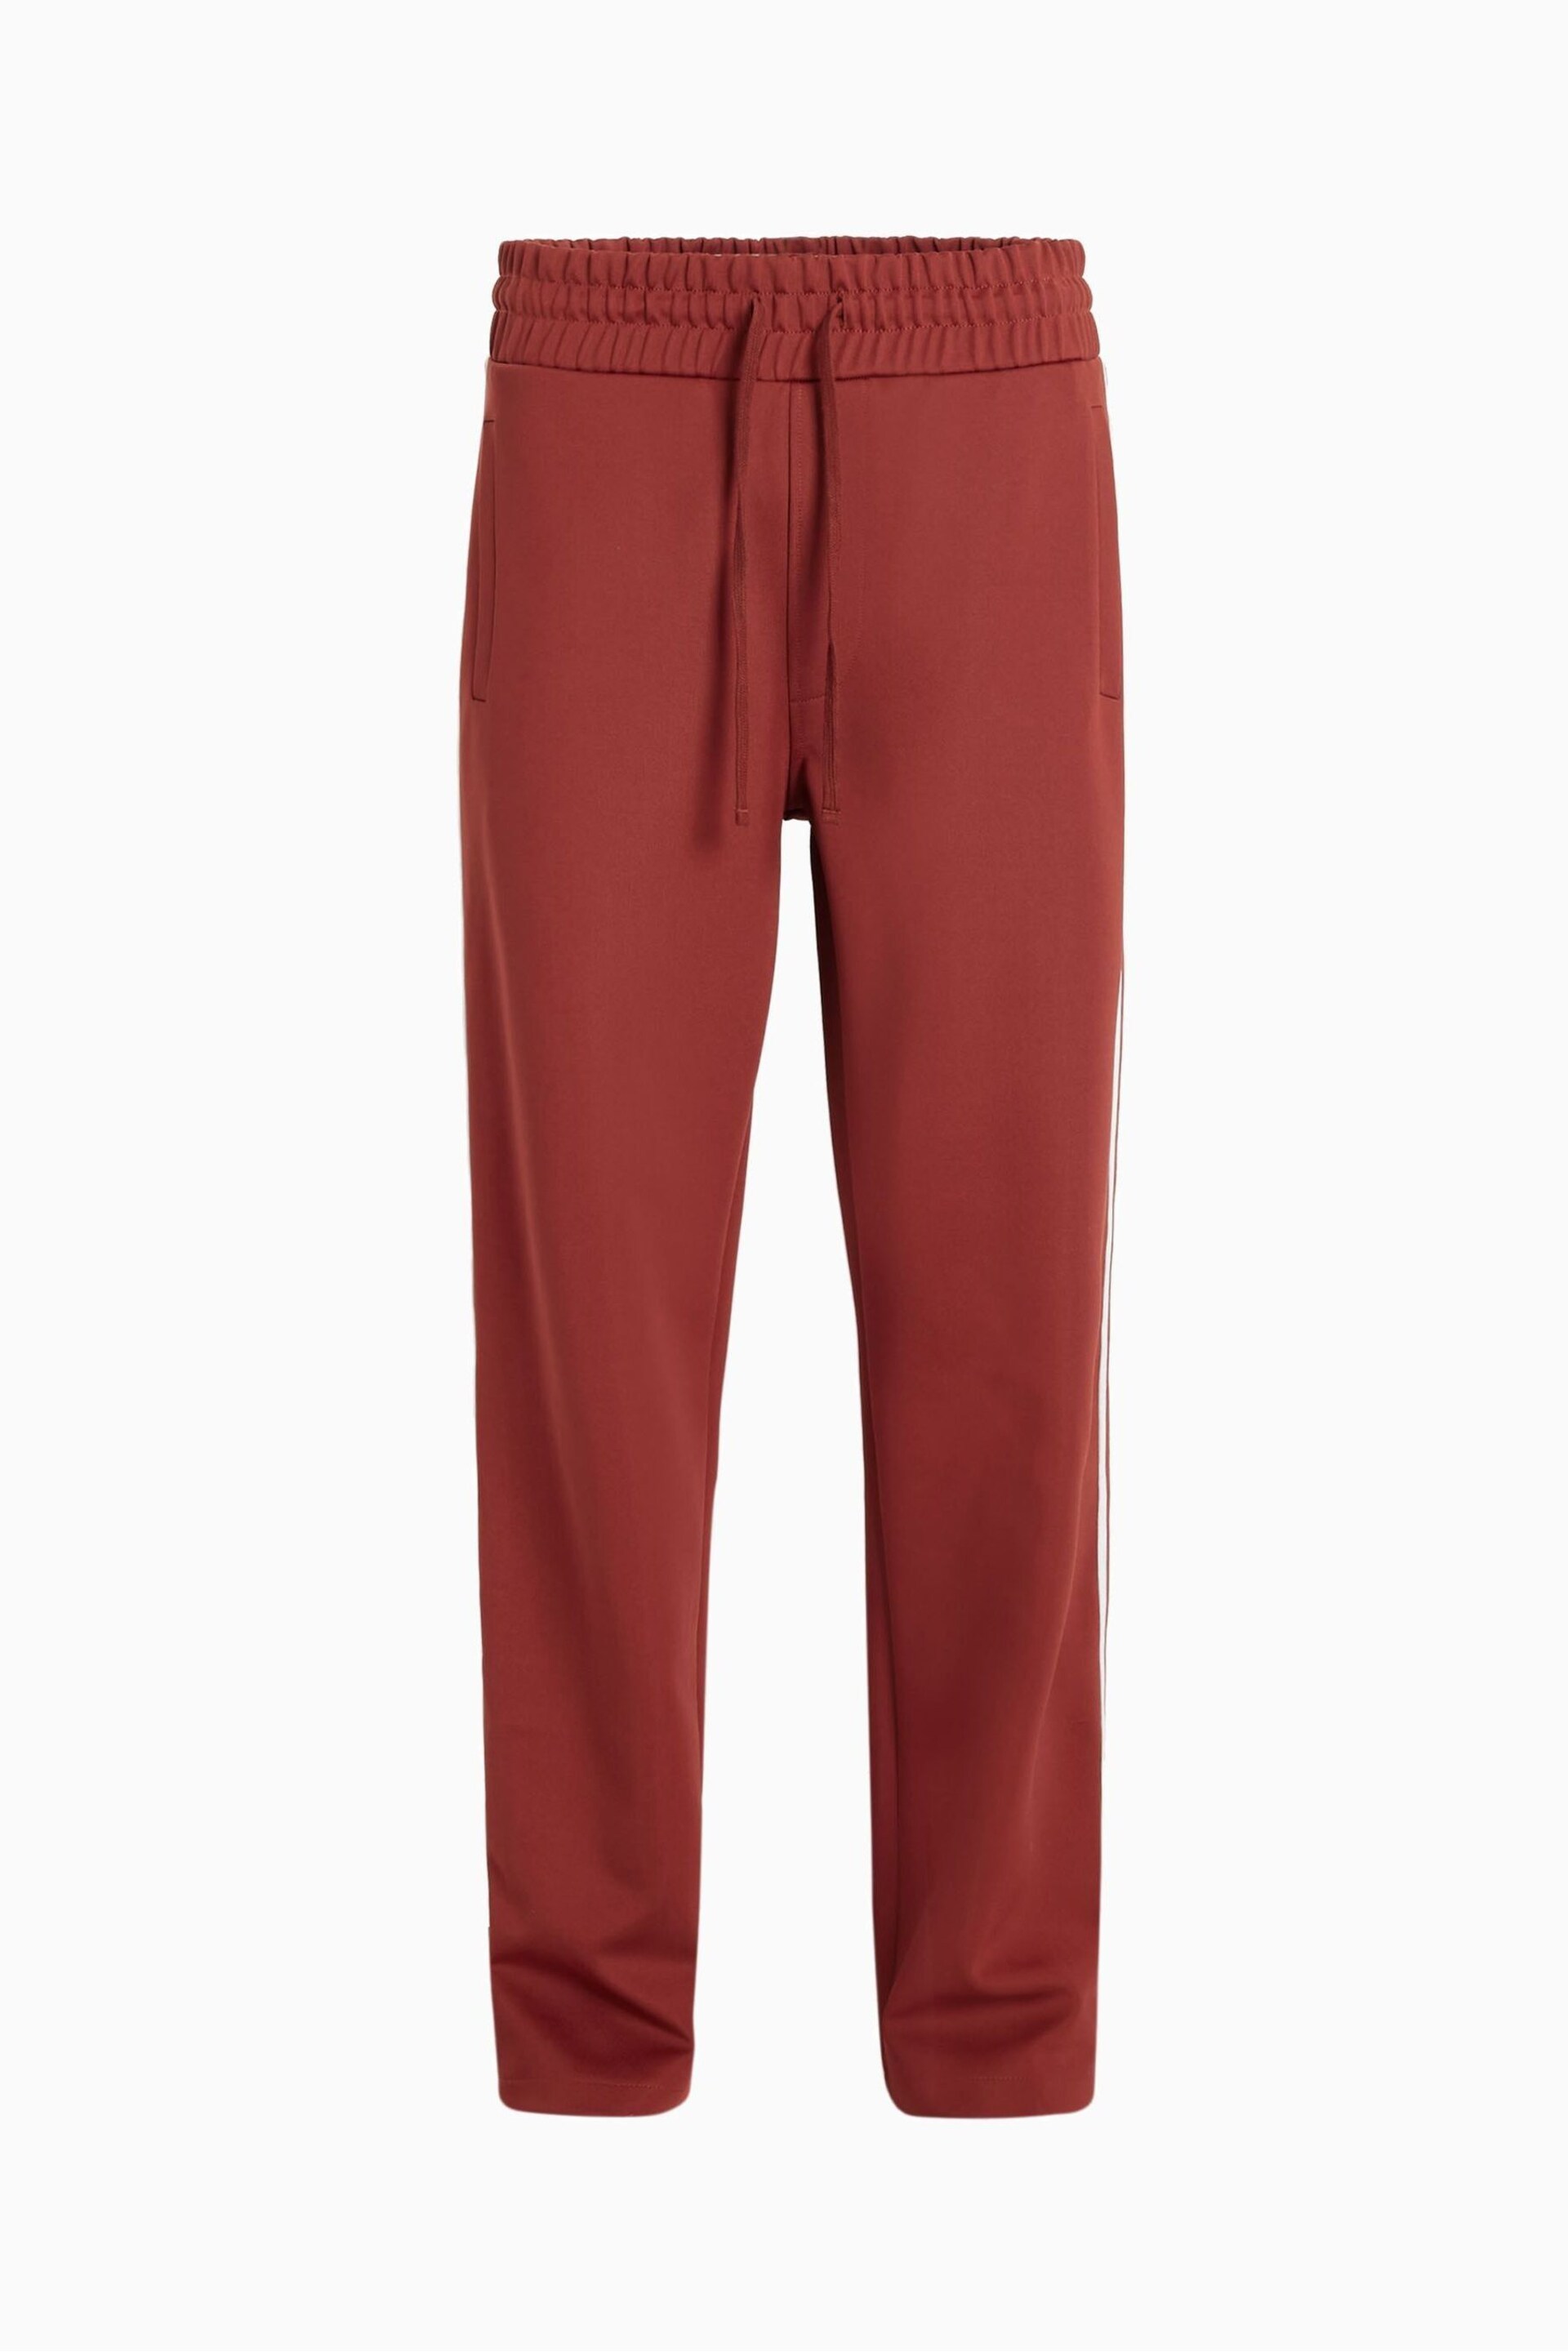 AllSaints Red Oren Joggers - Image 7 of 7